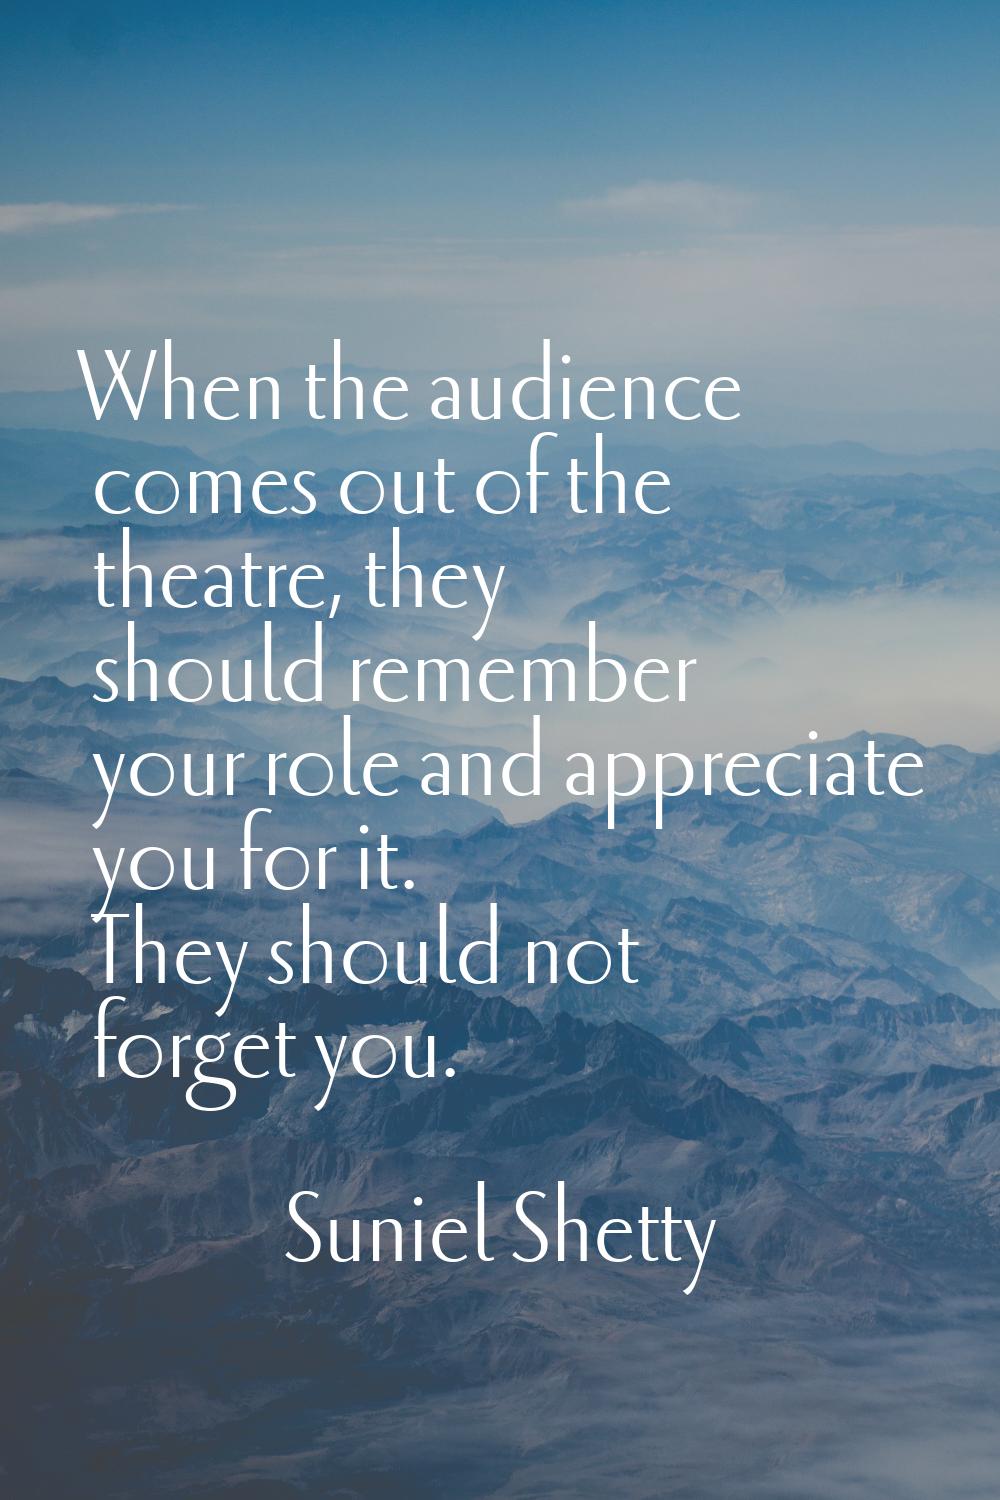 When the audience comes out of the theatre, they should remember your role and appreciate you for i